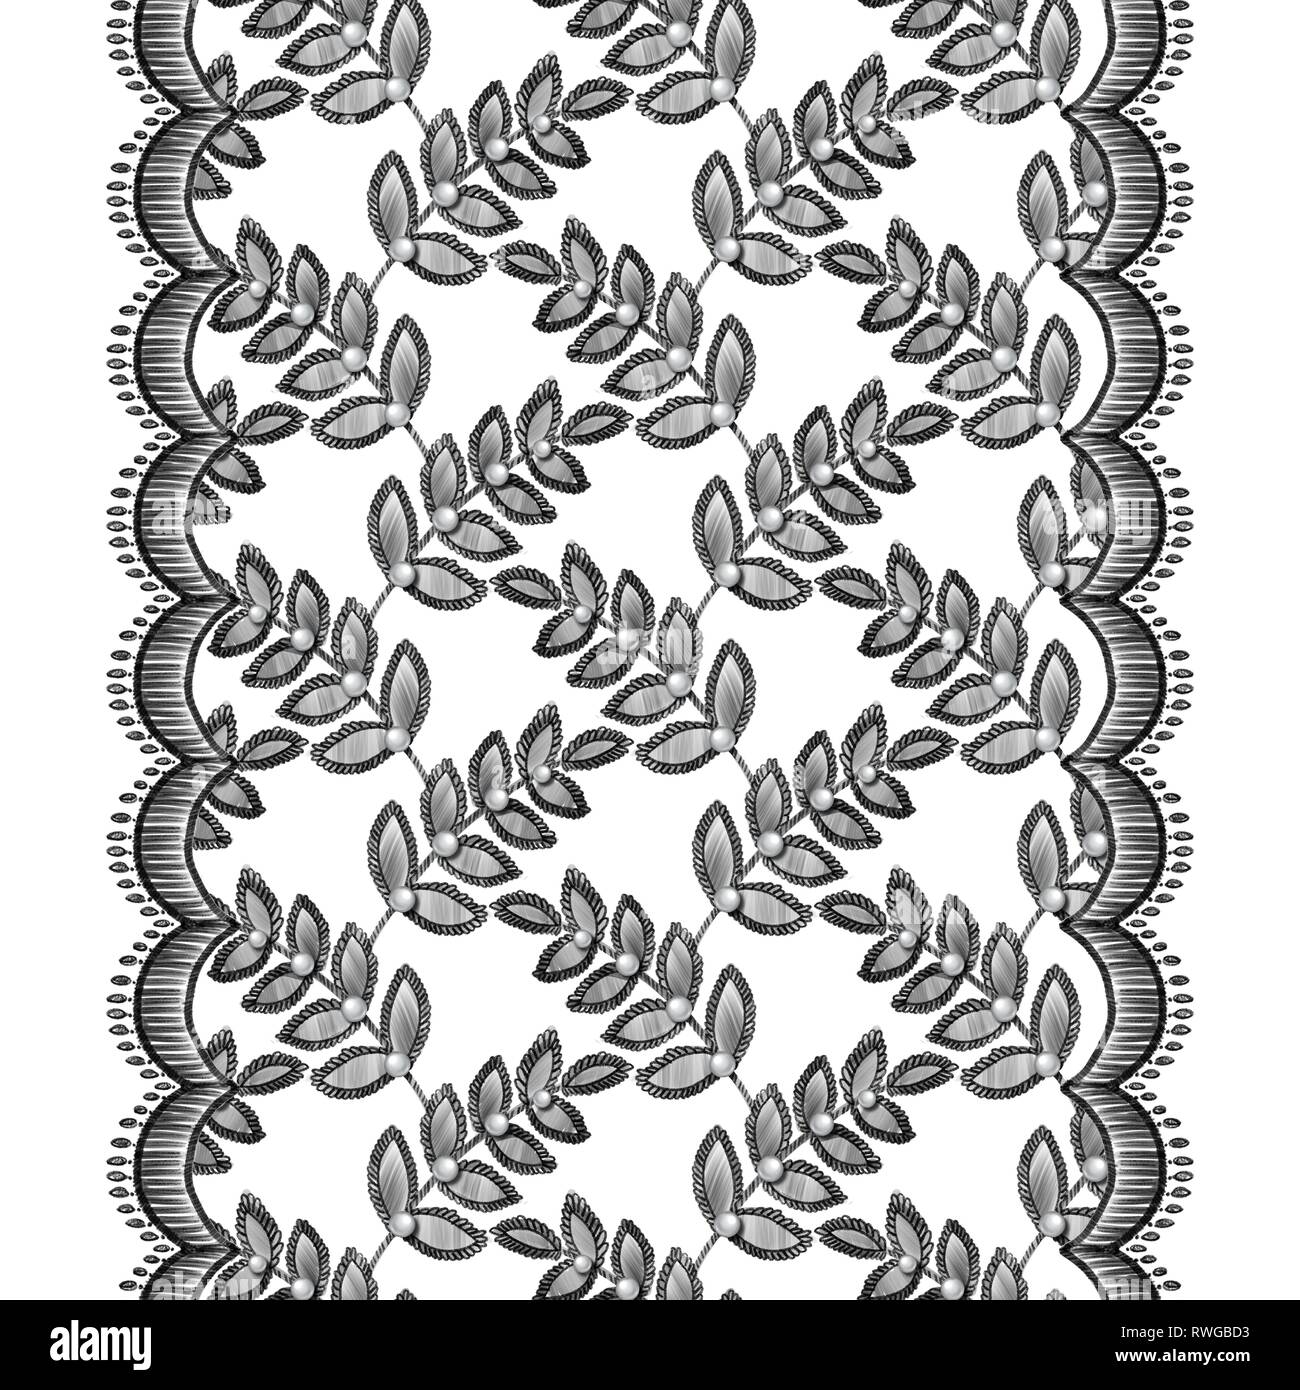 Lace seamless border with decortive leaves and pearls Stock Photo